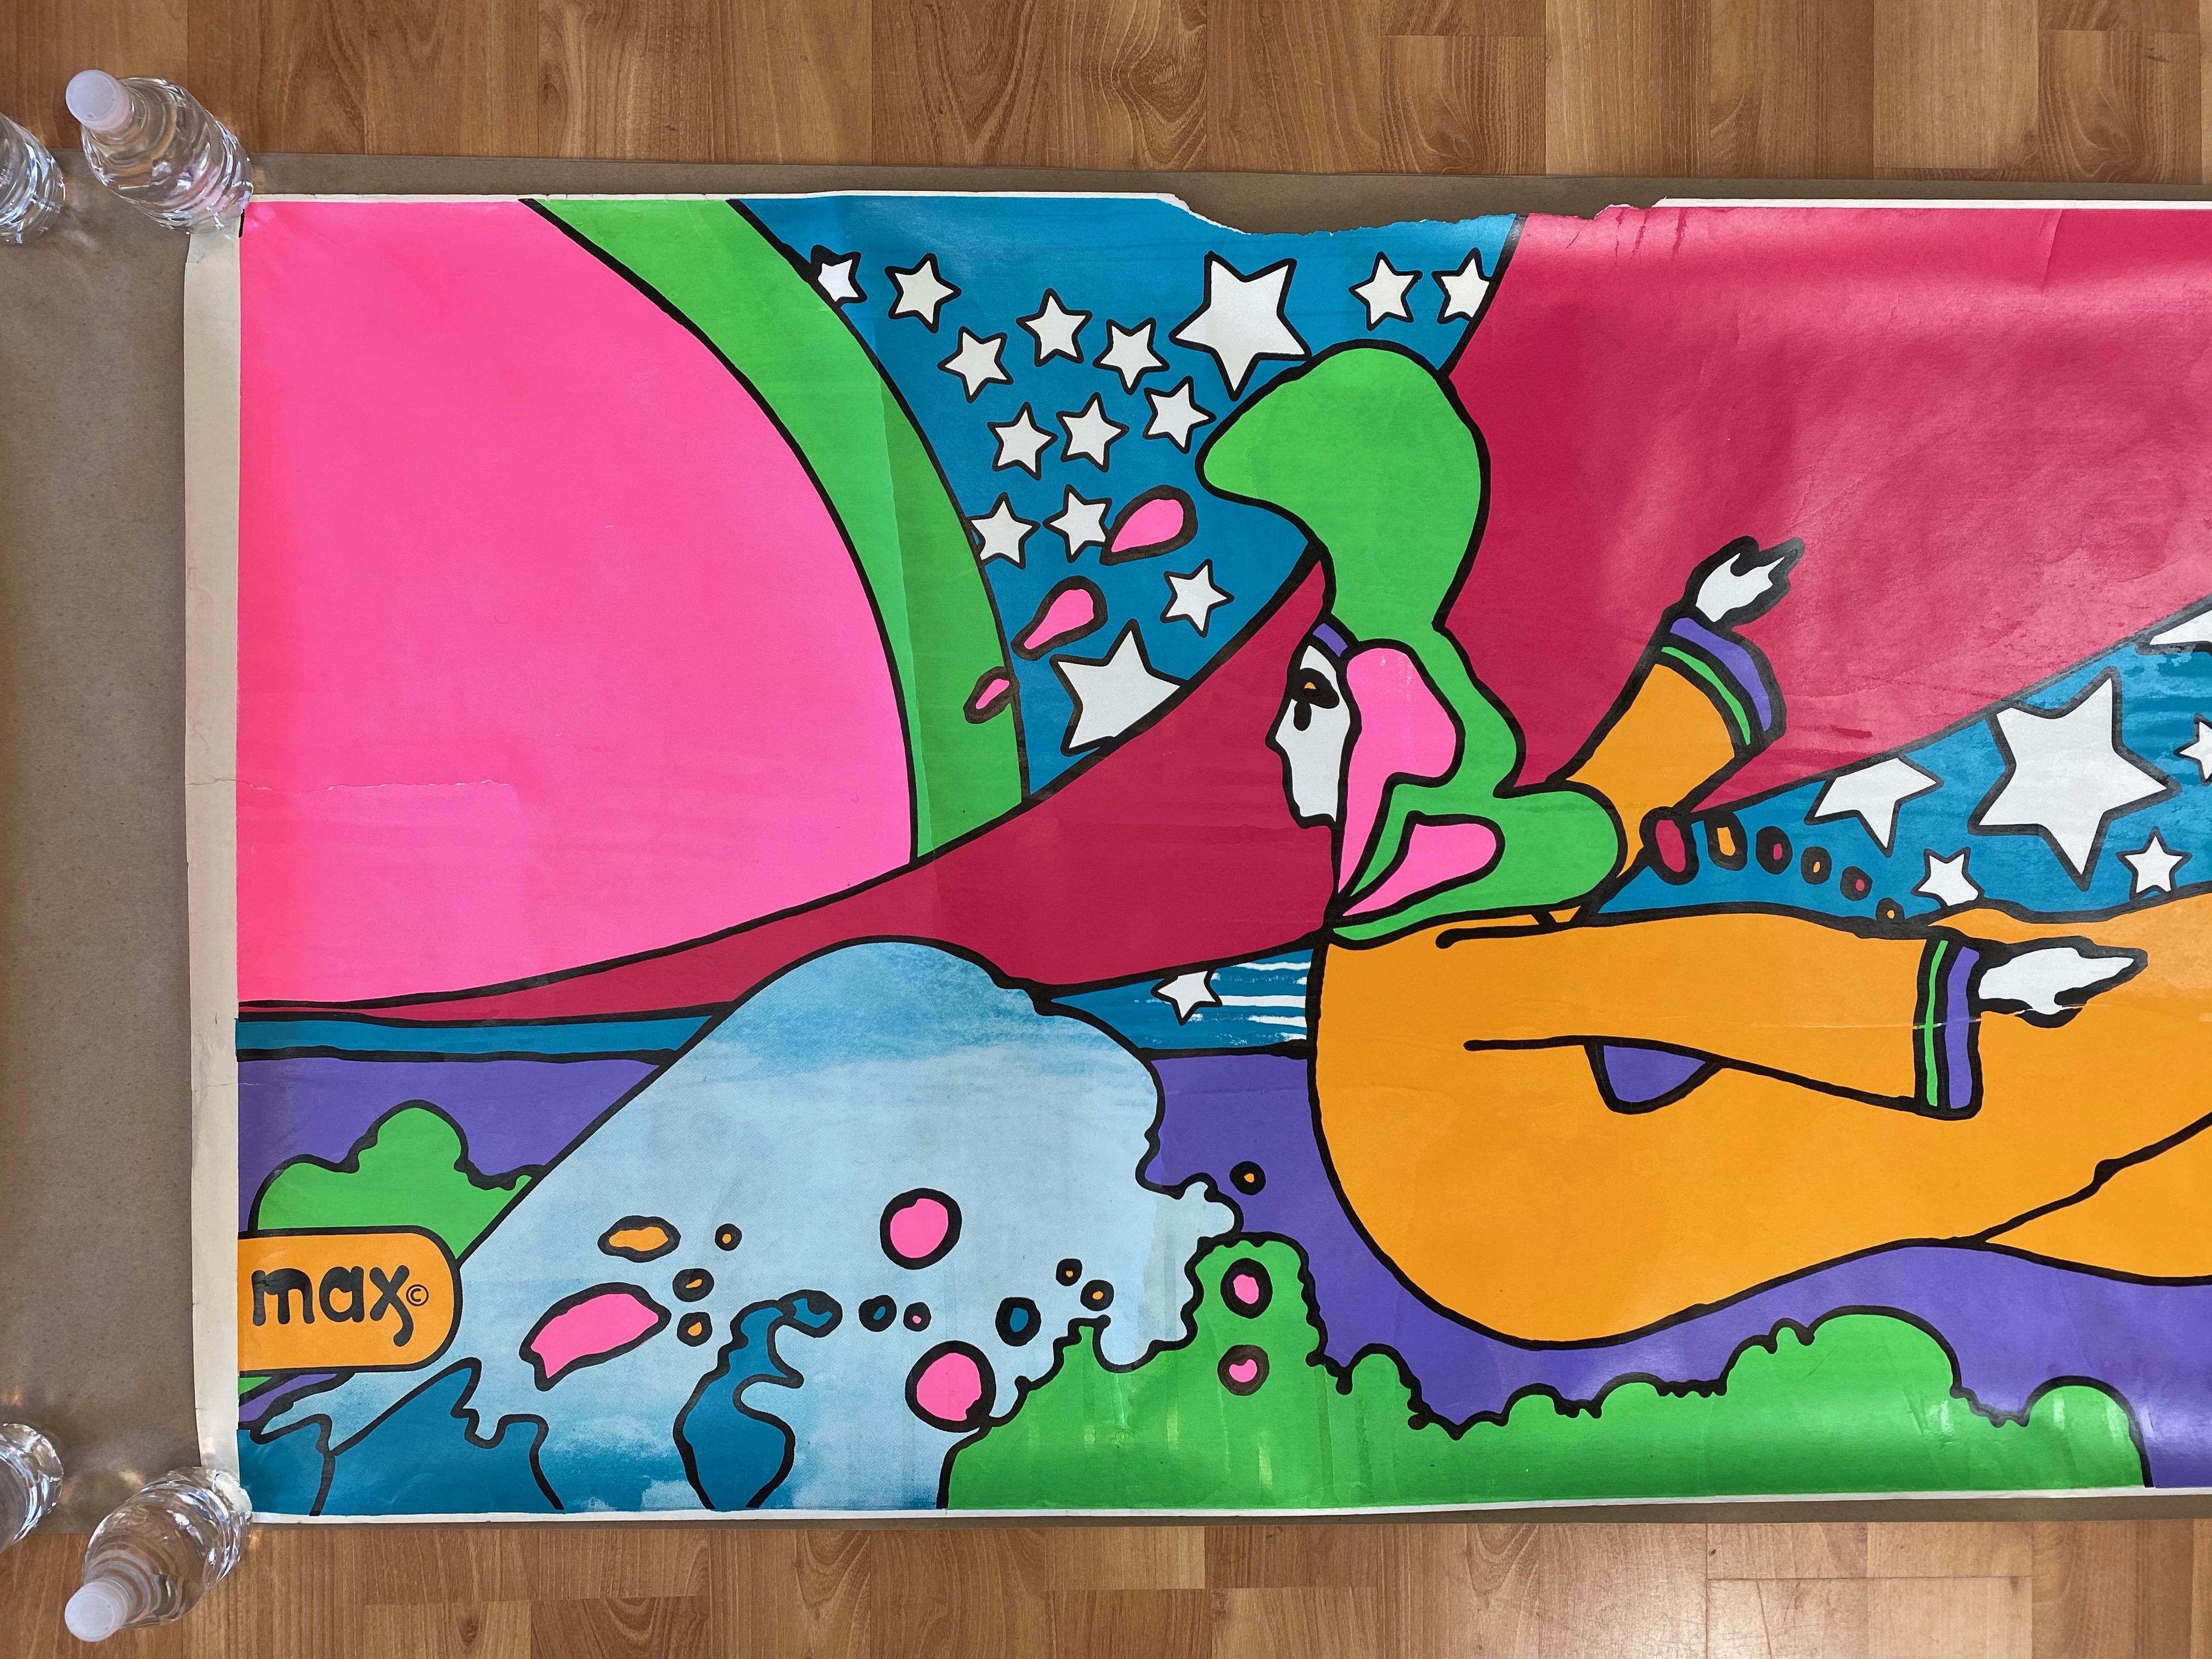 Peter Max 12-Foot-Wide Serigraph for 1970 de Young Museum Solo Exhibition ‘A’ For Sale 3